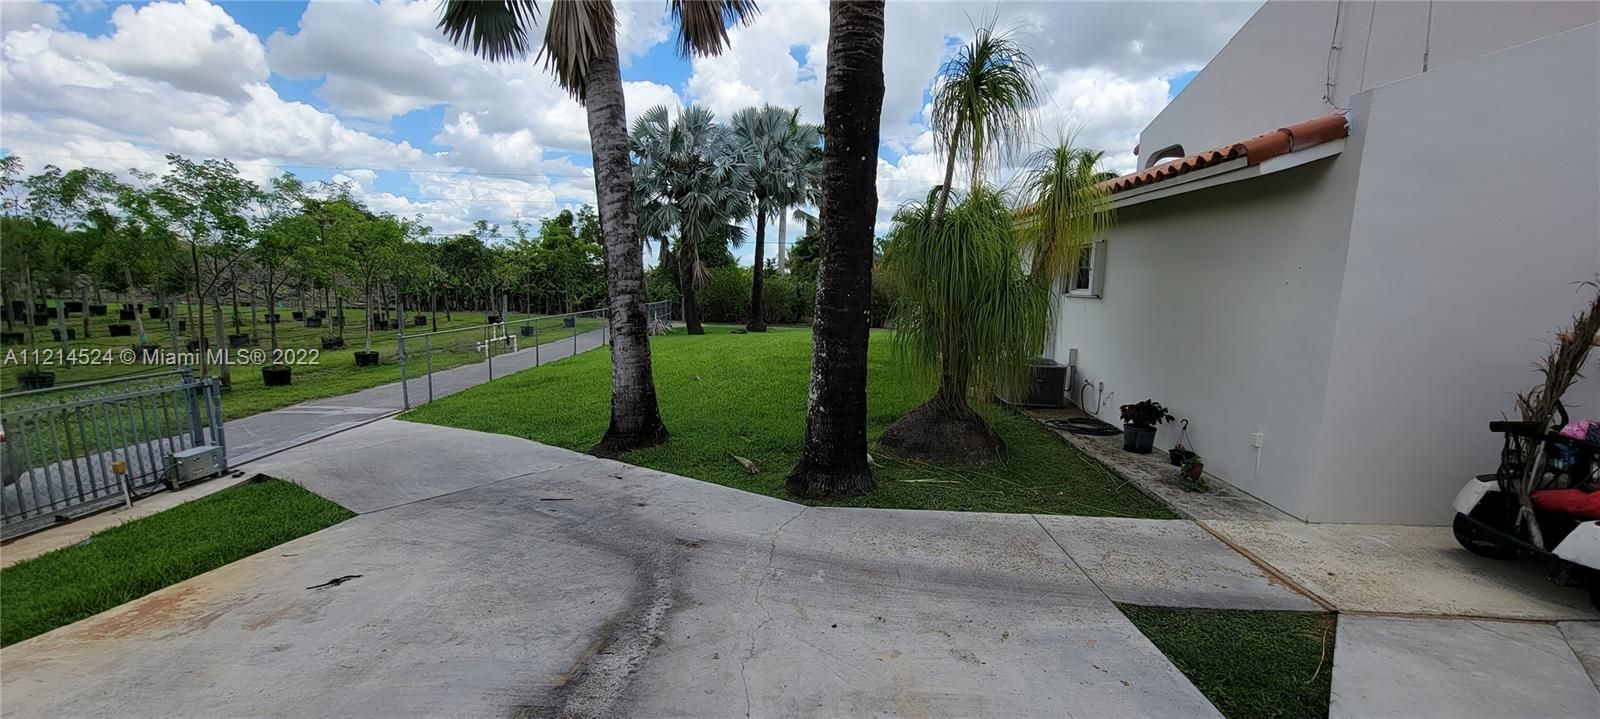 Rear side of residence driveway from Guest house